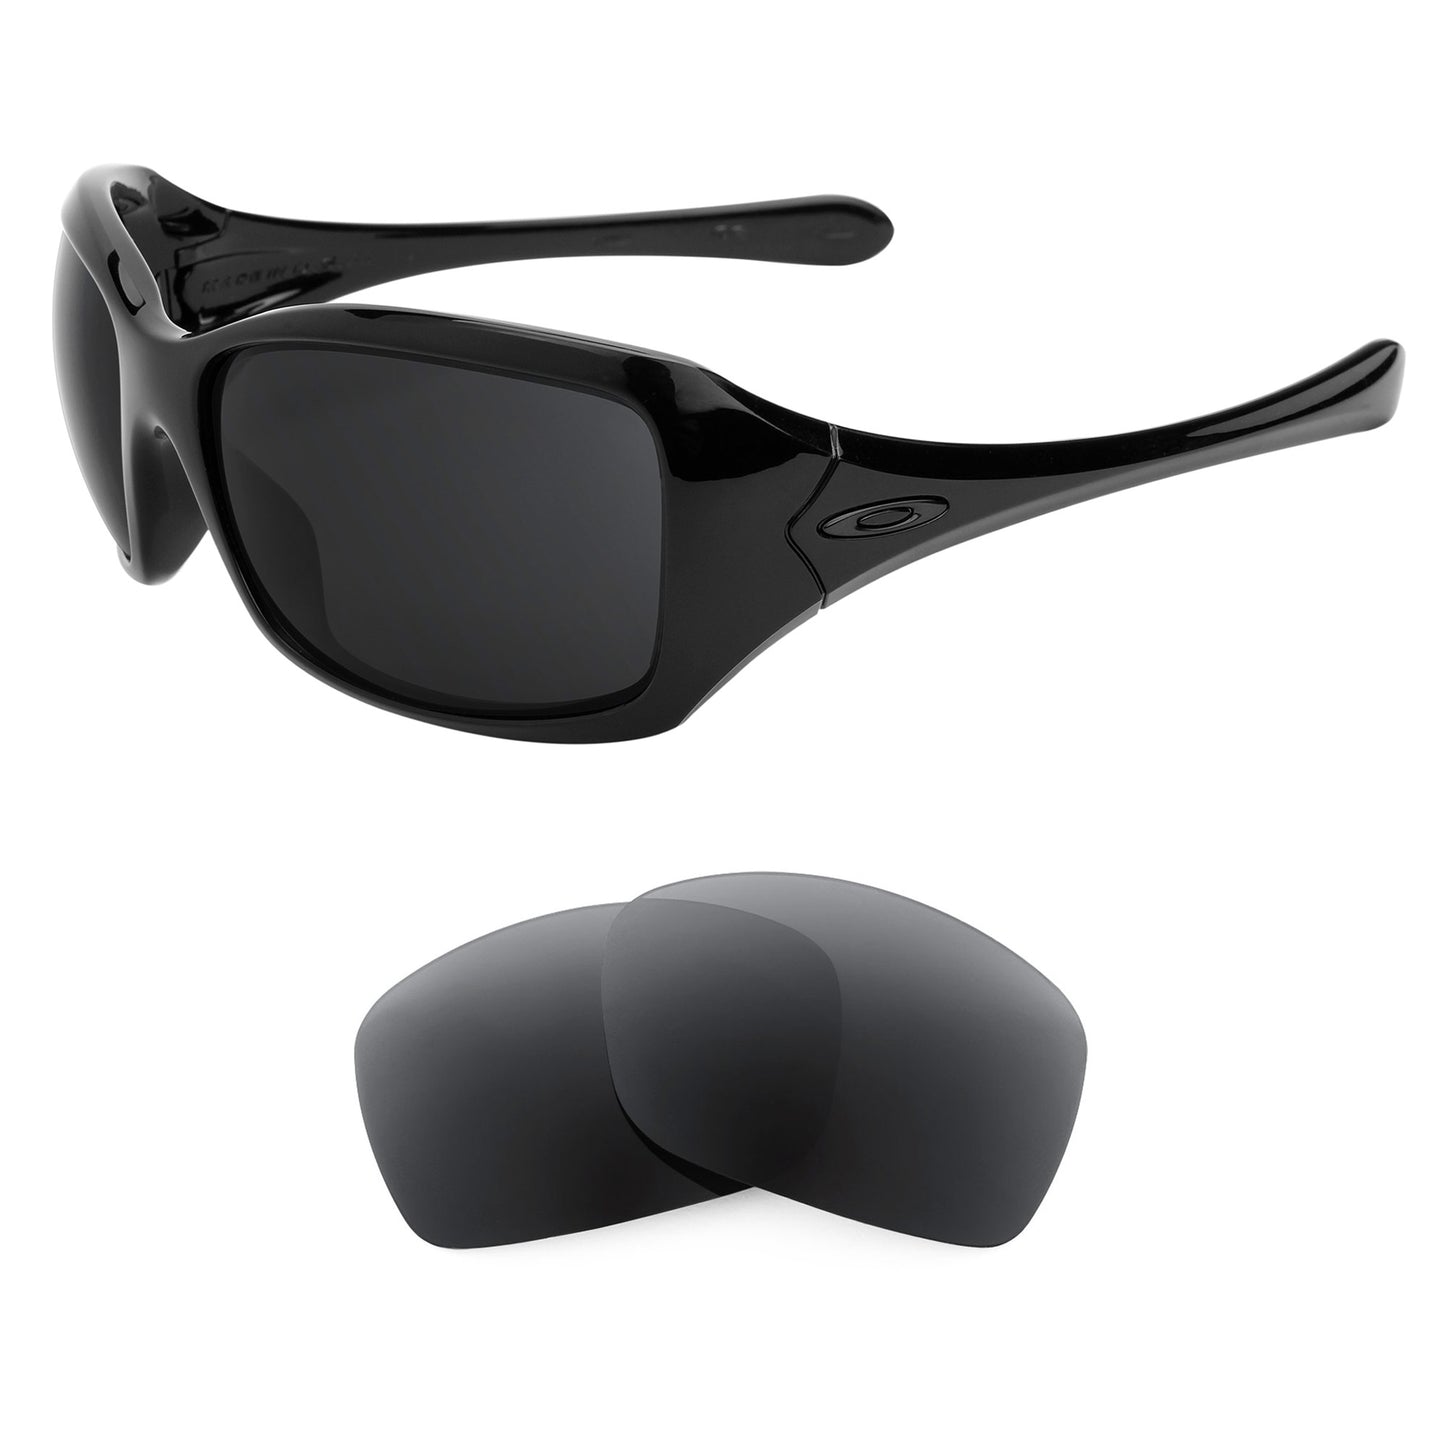 Oakley Ravishing sunglasses with replacement lenses